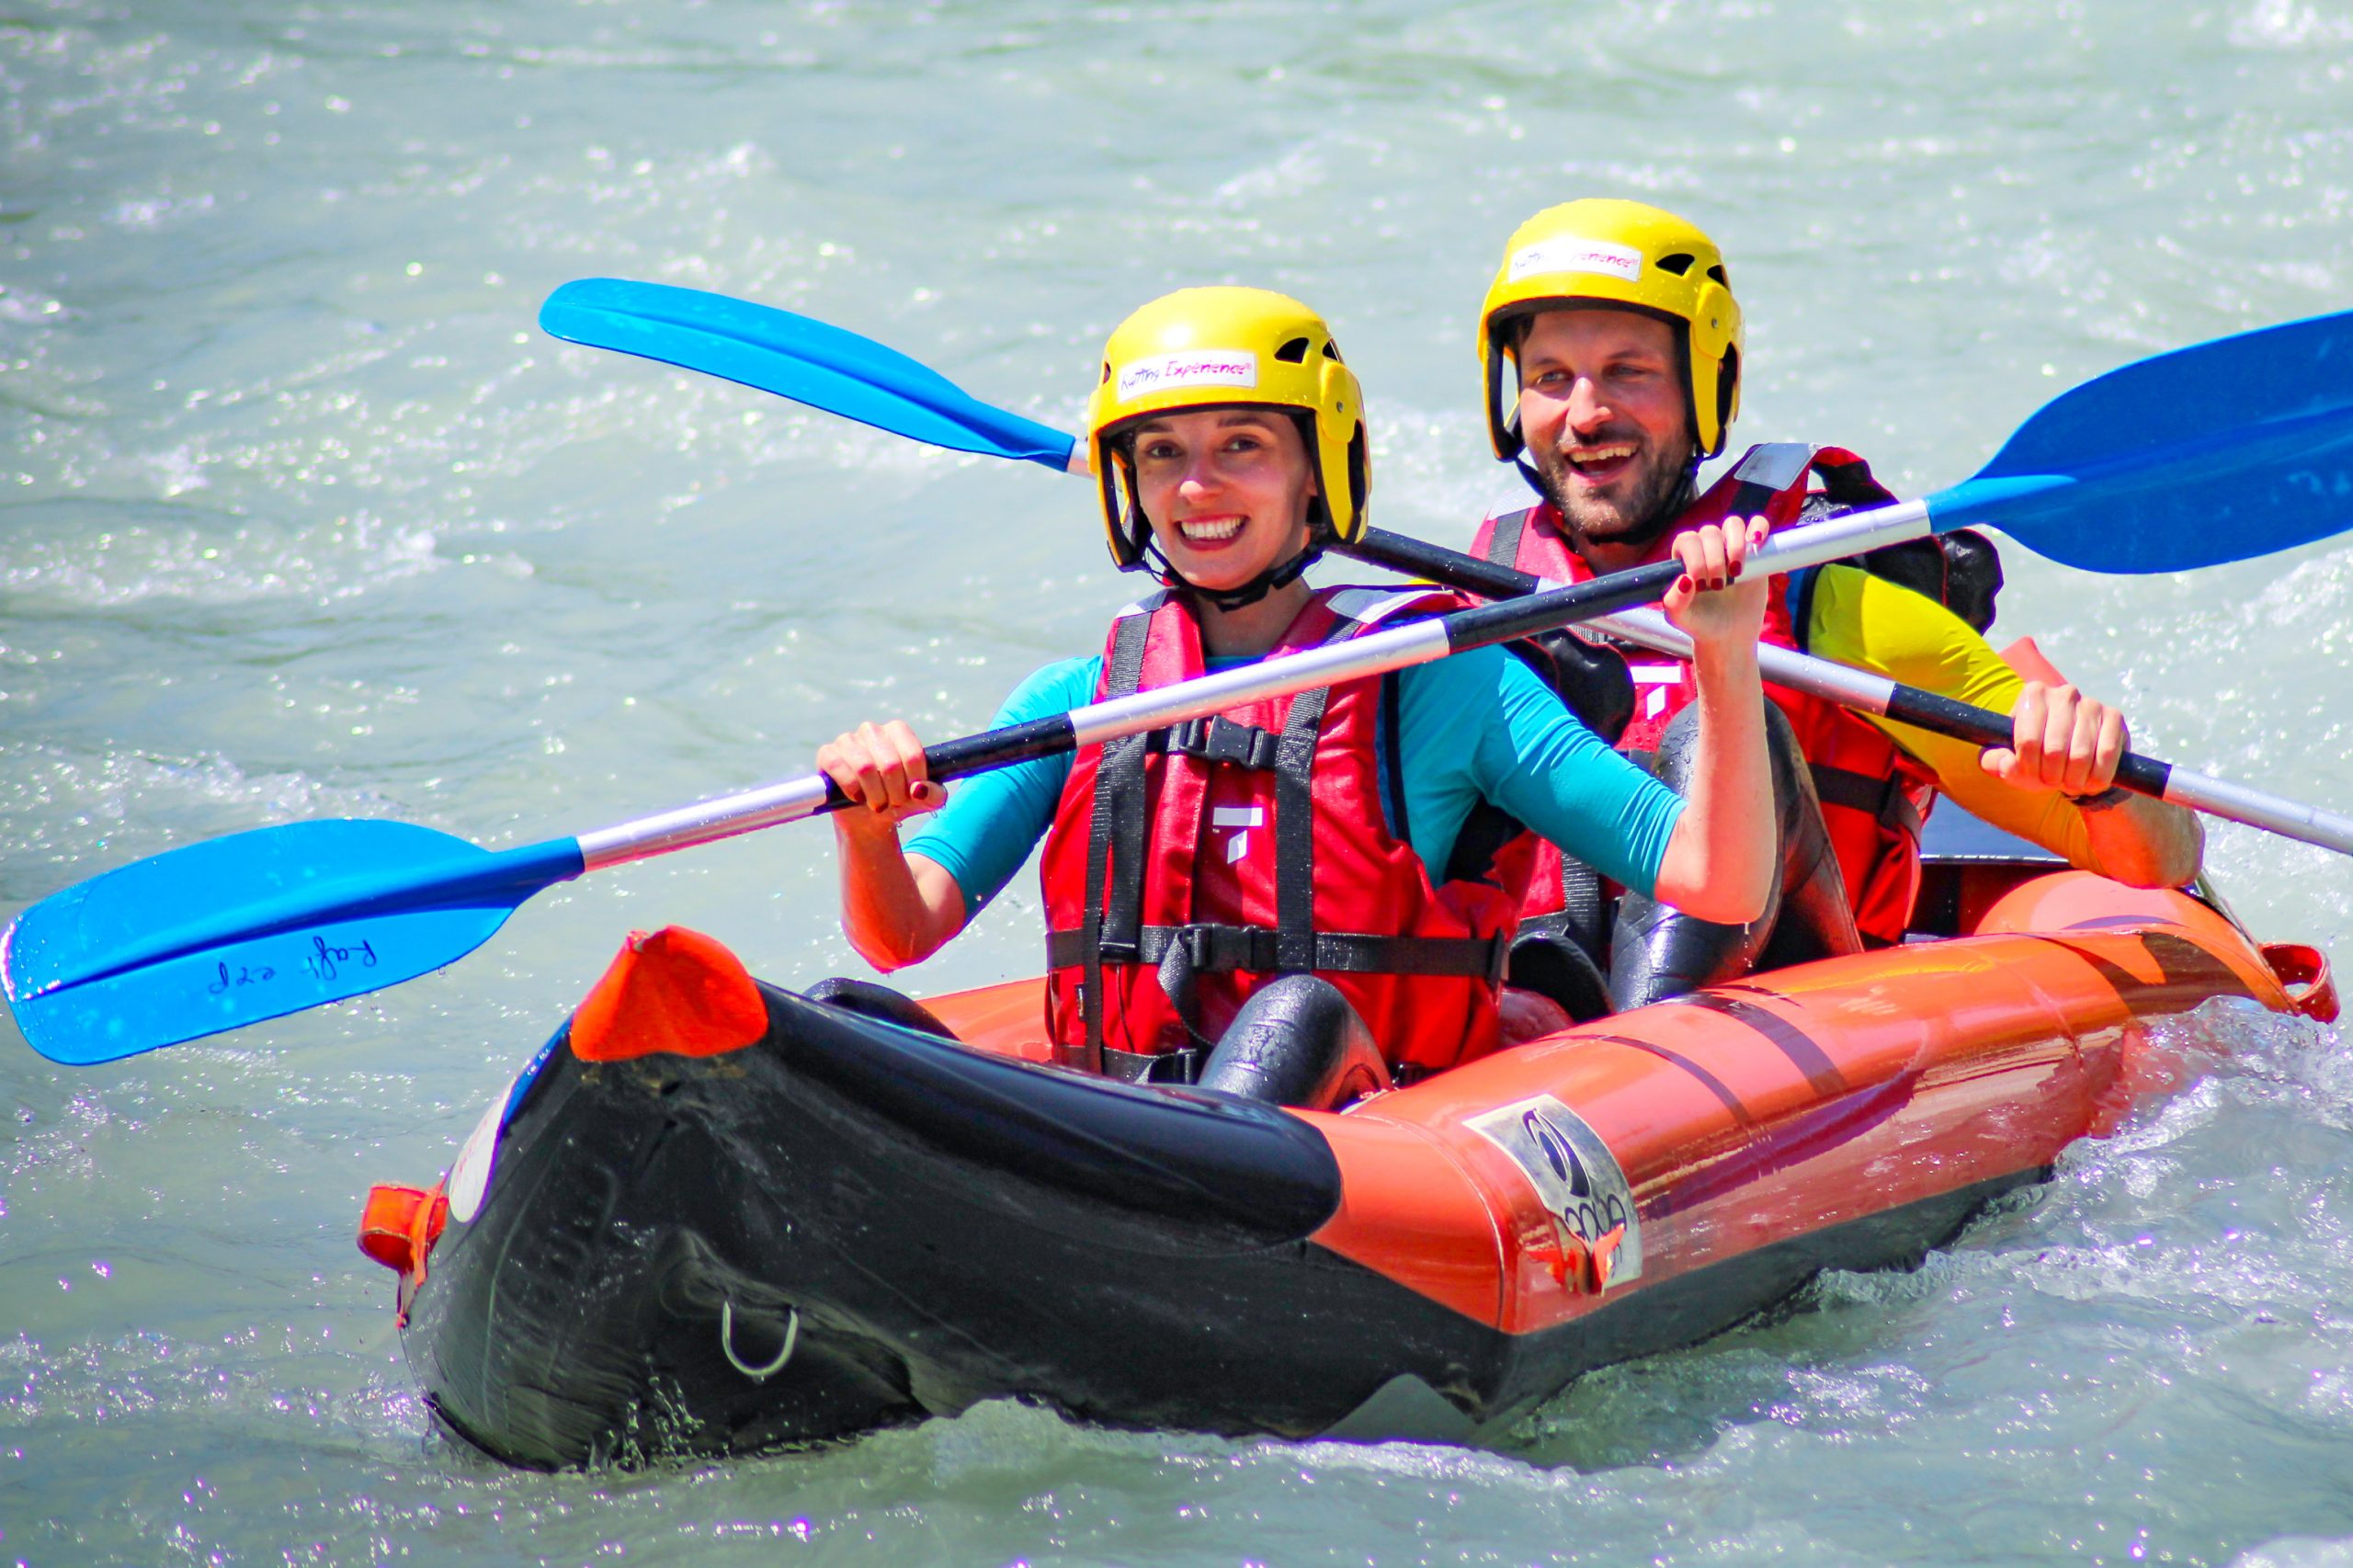 In cano-rafting, two people are descending the river